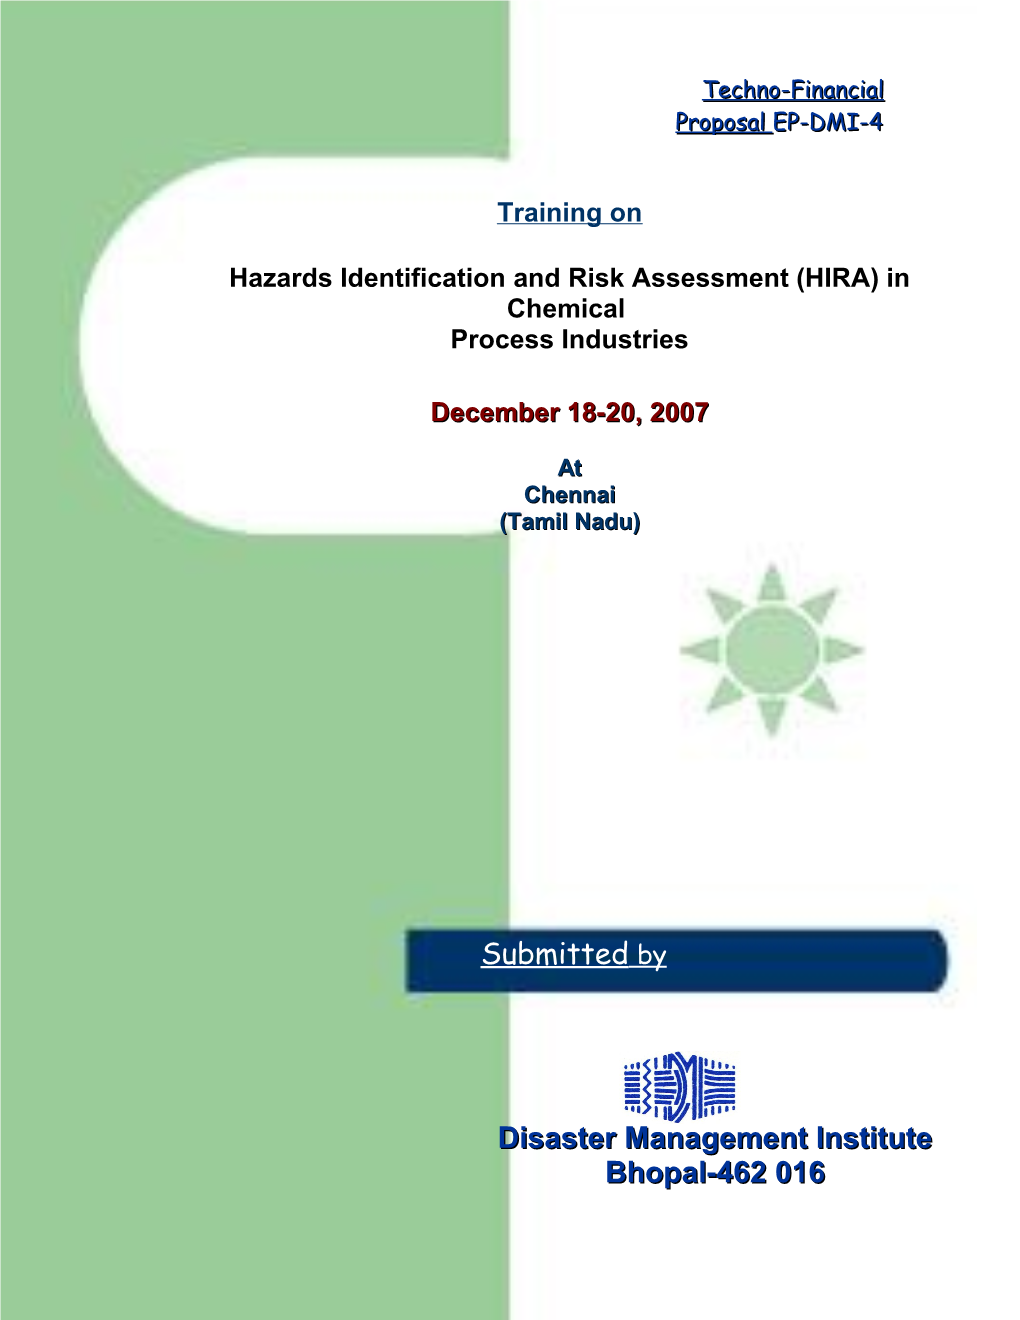 Hazards Identification and Risk Assessment (HIRA) in Chemical Process Industries